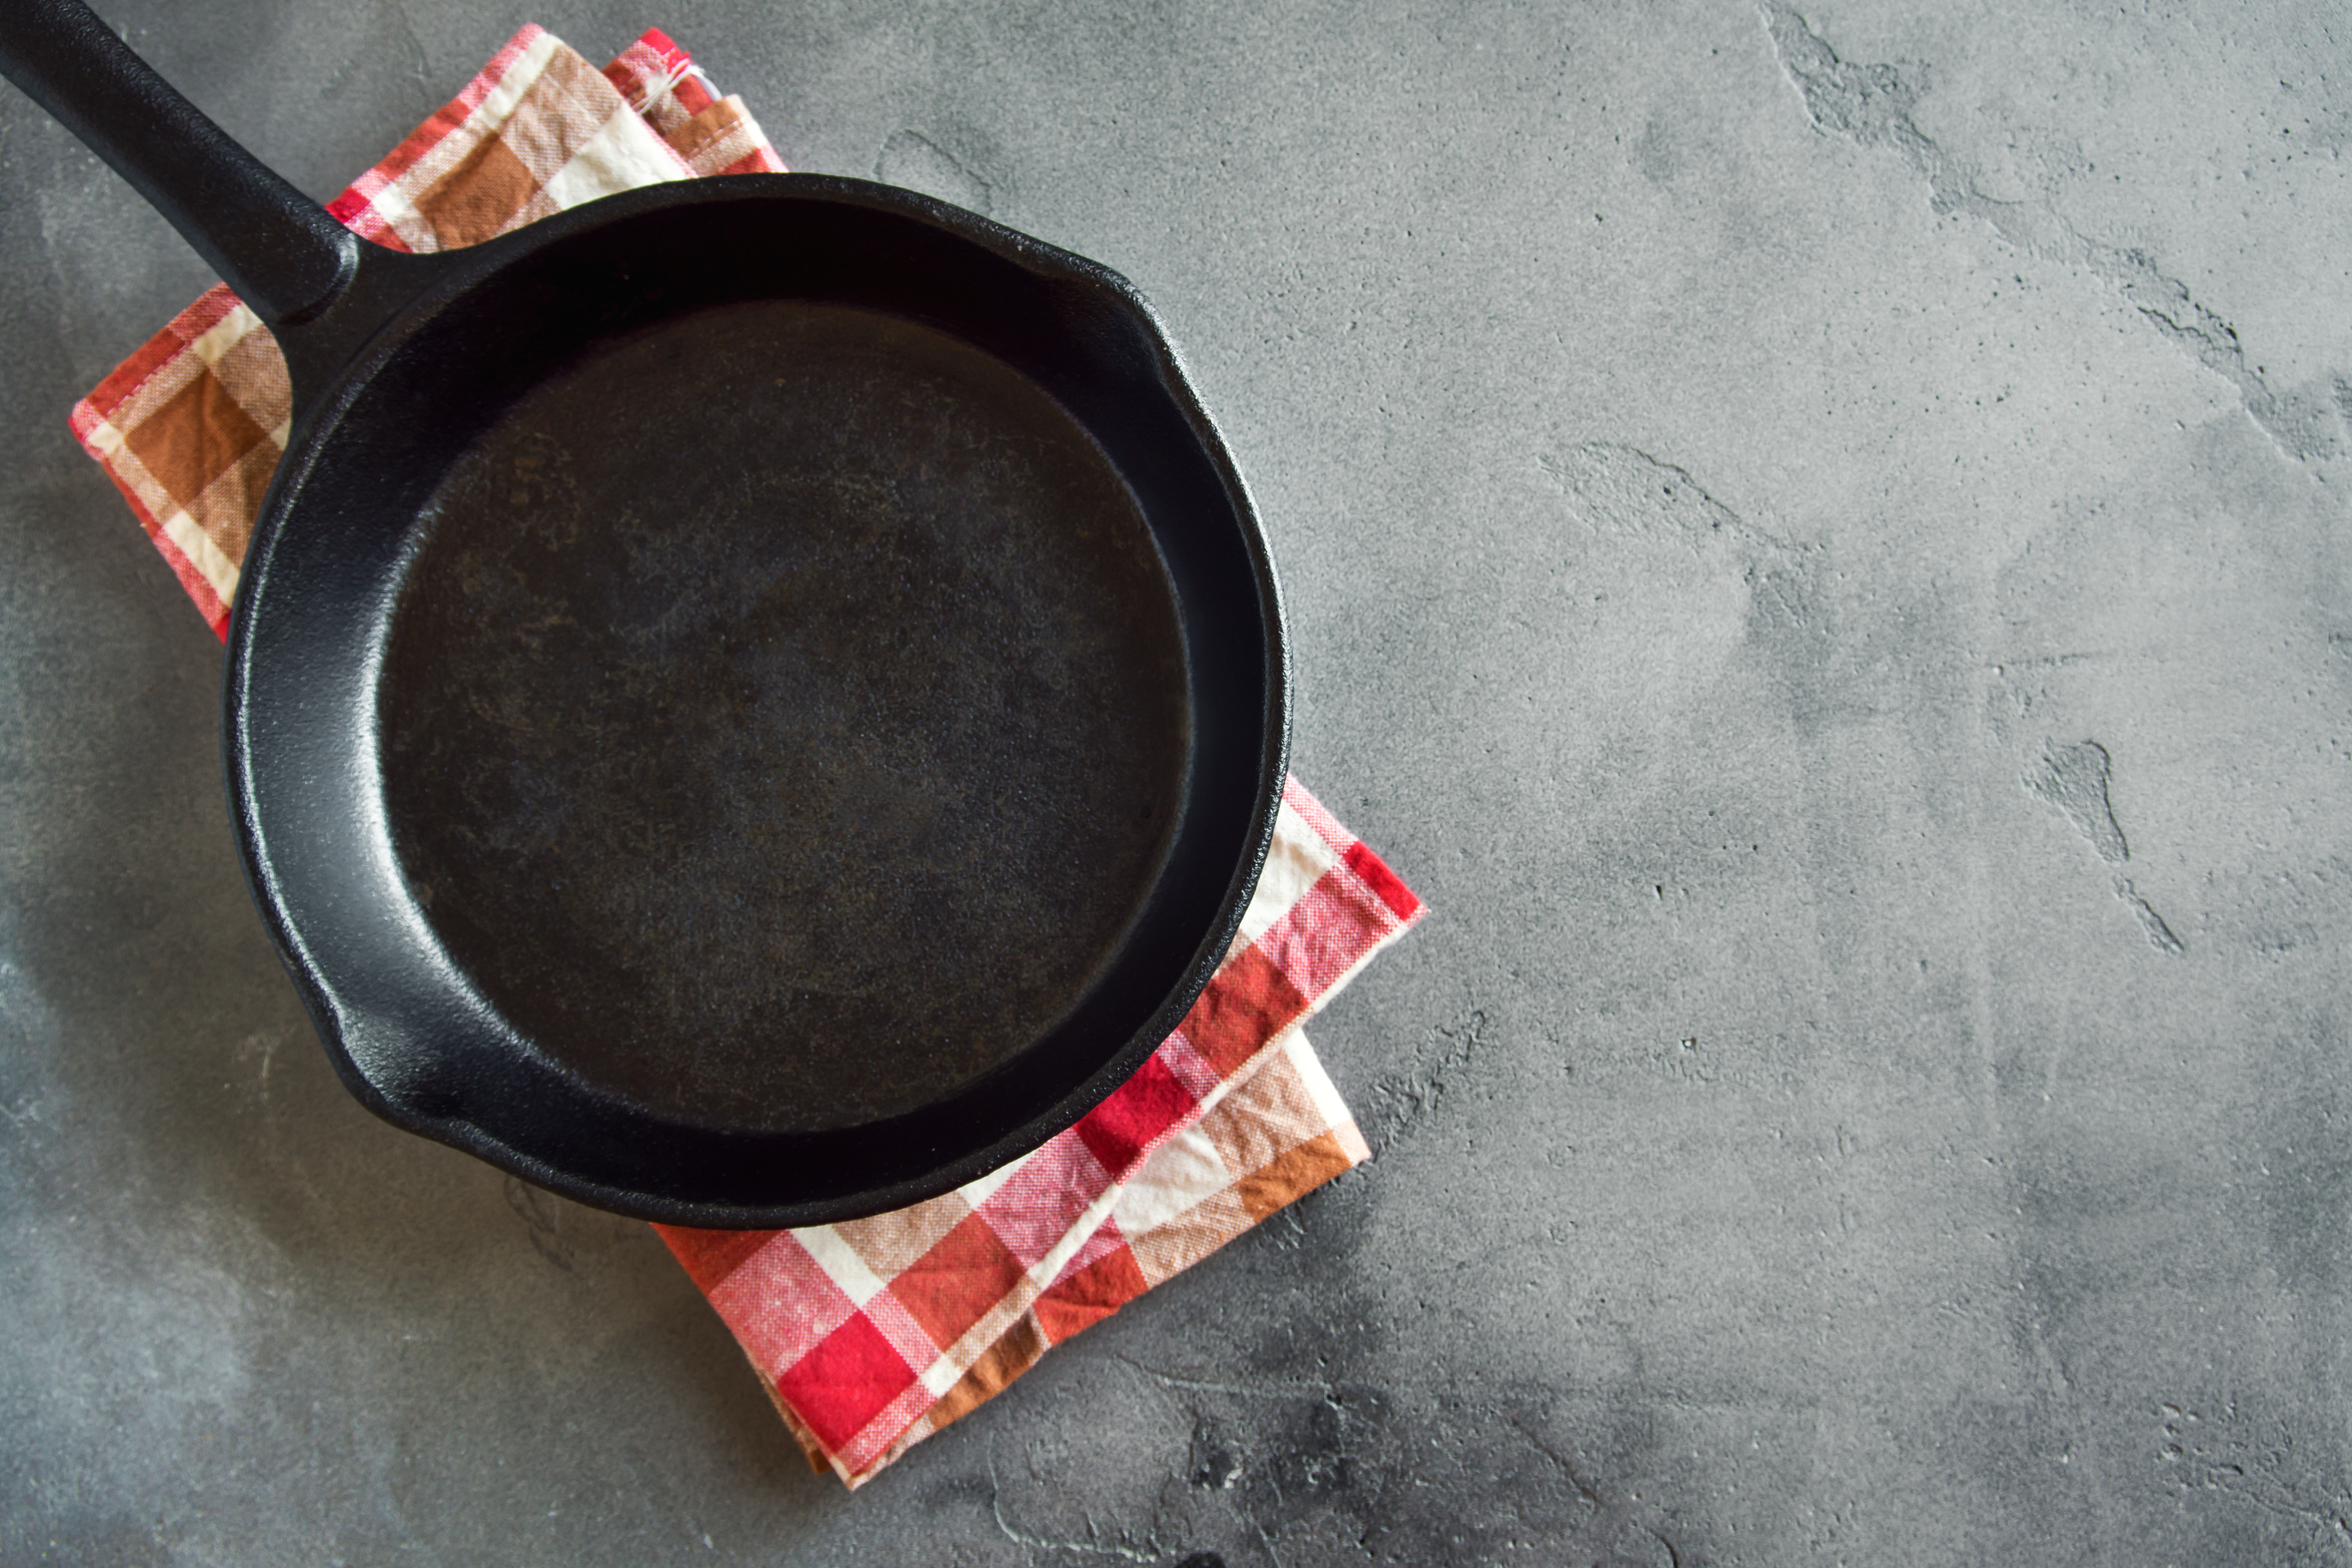 5 Easy Care Tips for Cast Iron - Price Chopper - Market 32